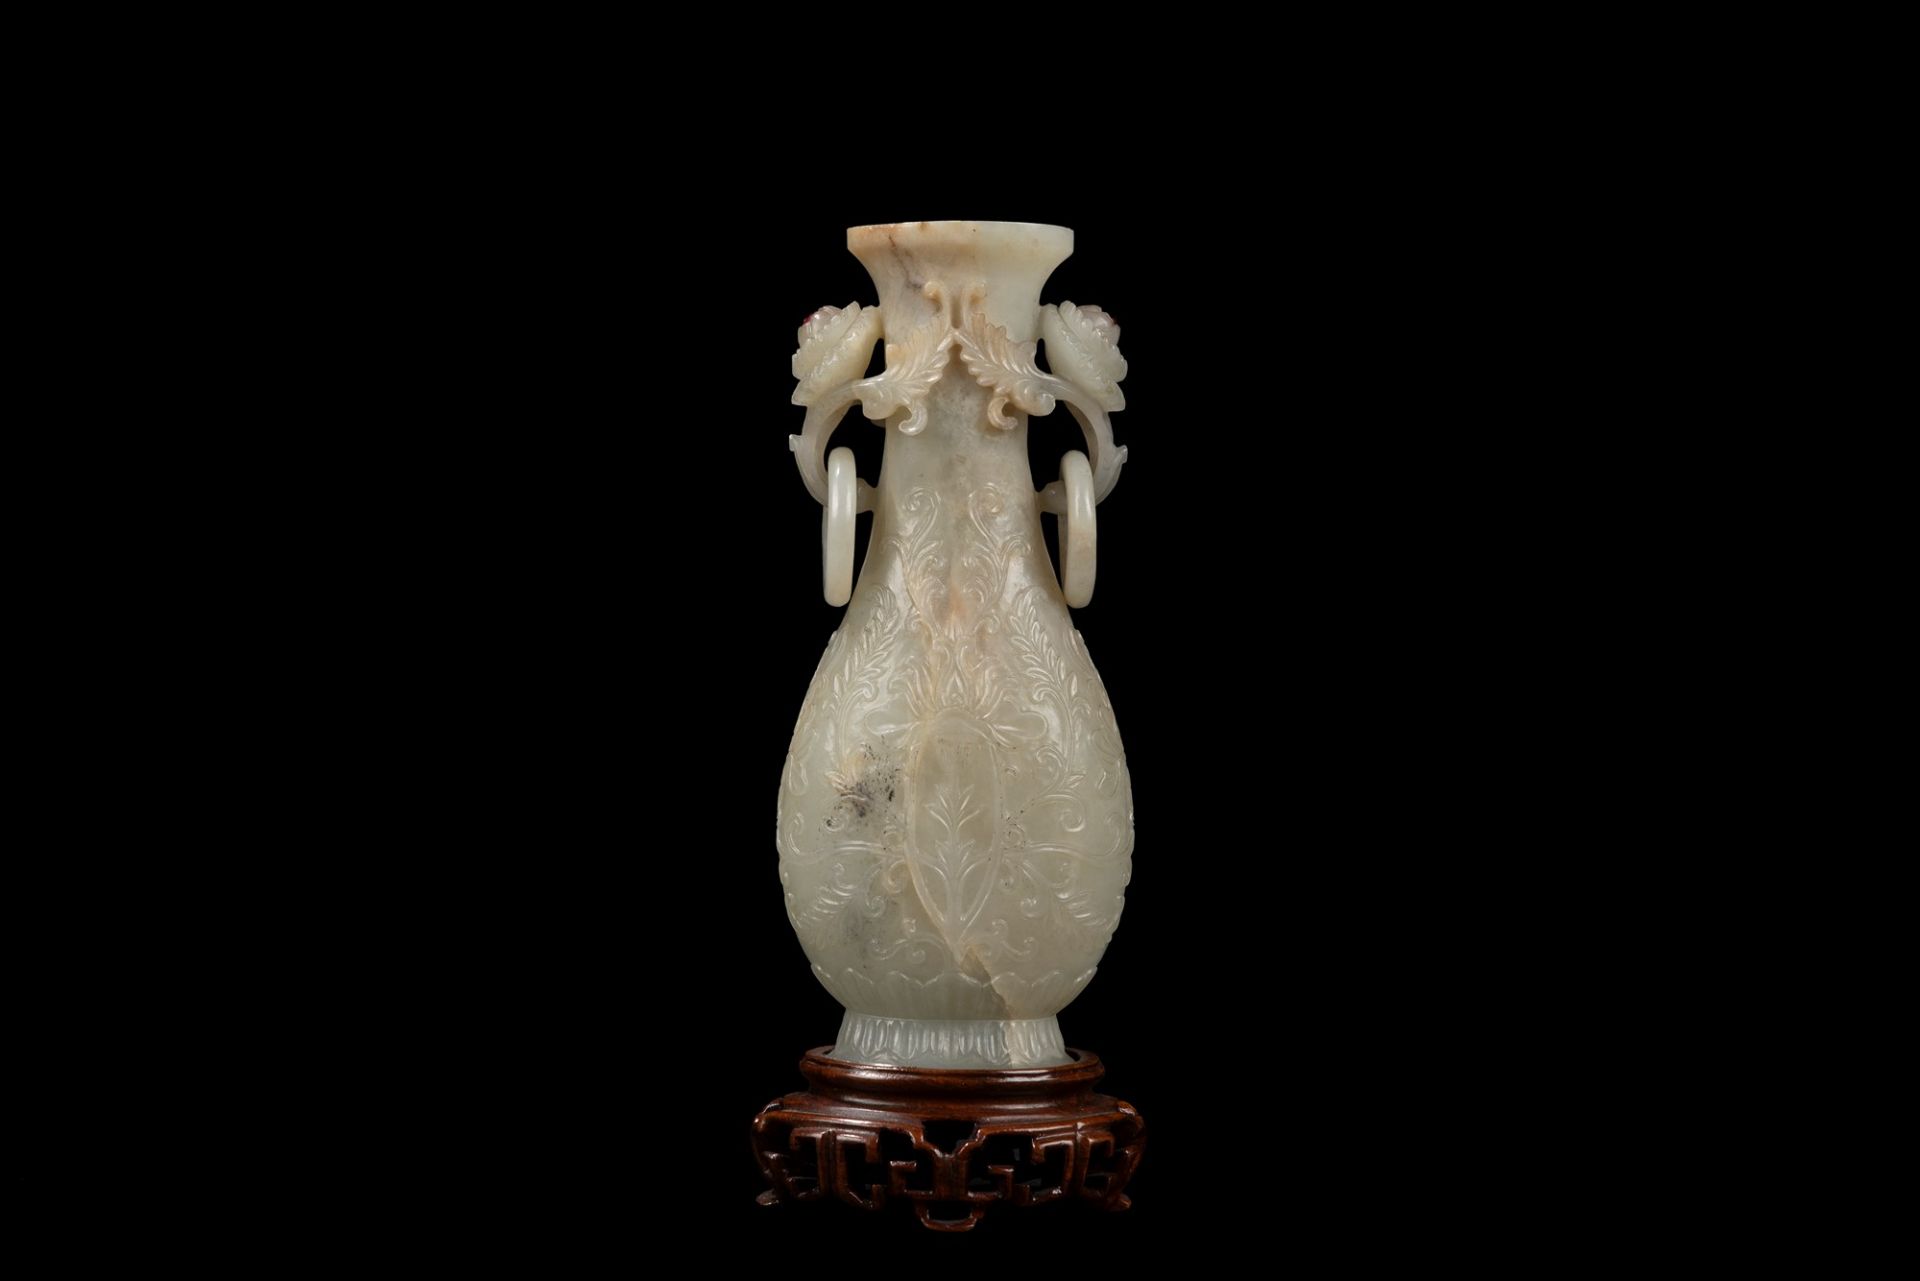 A CHINESE MUGHAL STYLE CARVED CELADON JADE ELONGATED VASE, China, Qing dynasty, 19th / 20th century - Image 3 of 3